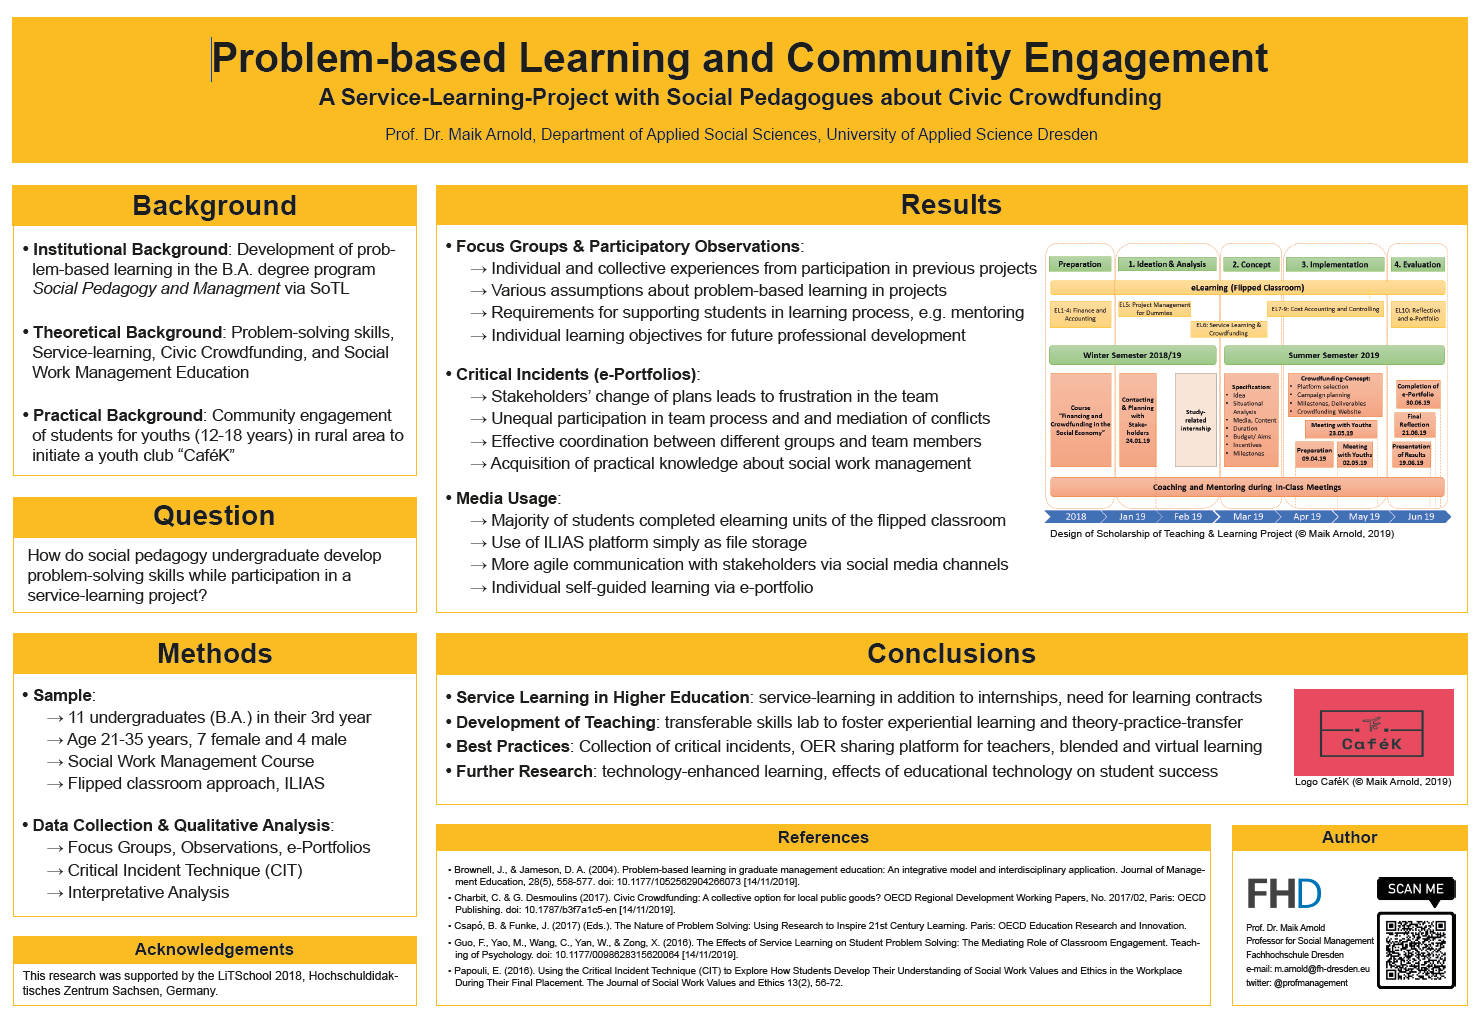 Problem-based Learning and Community Engagement (Poster)